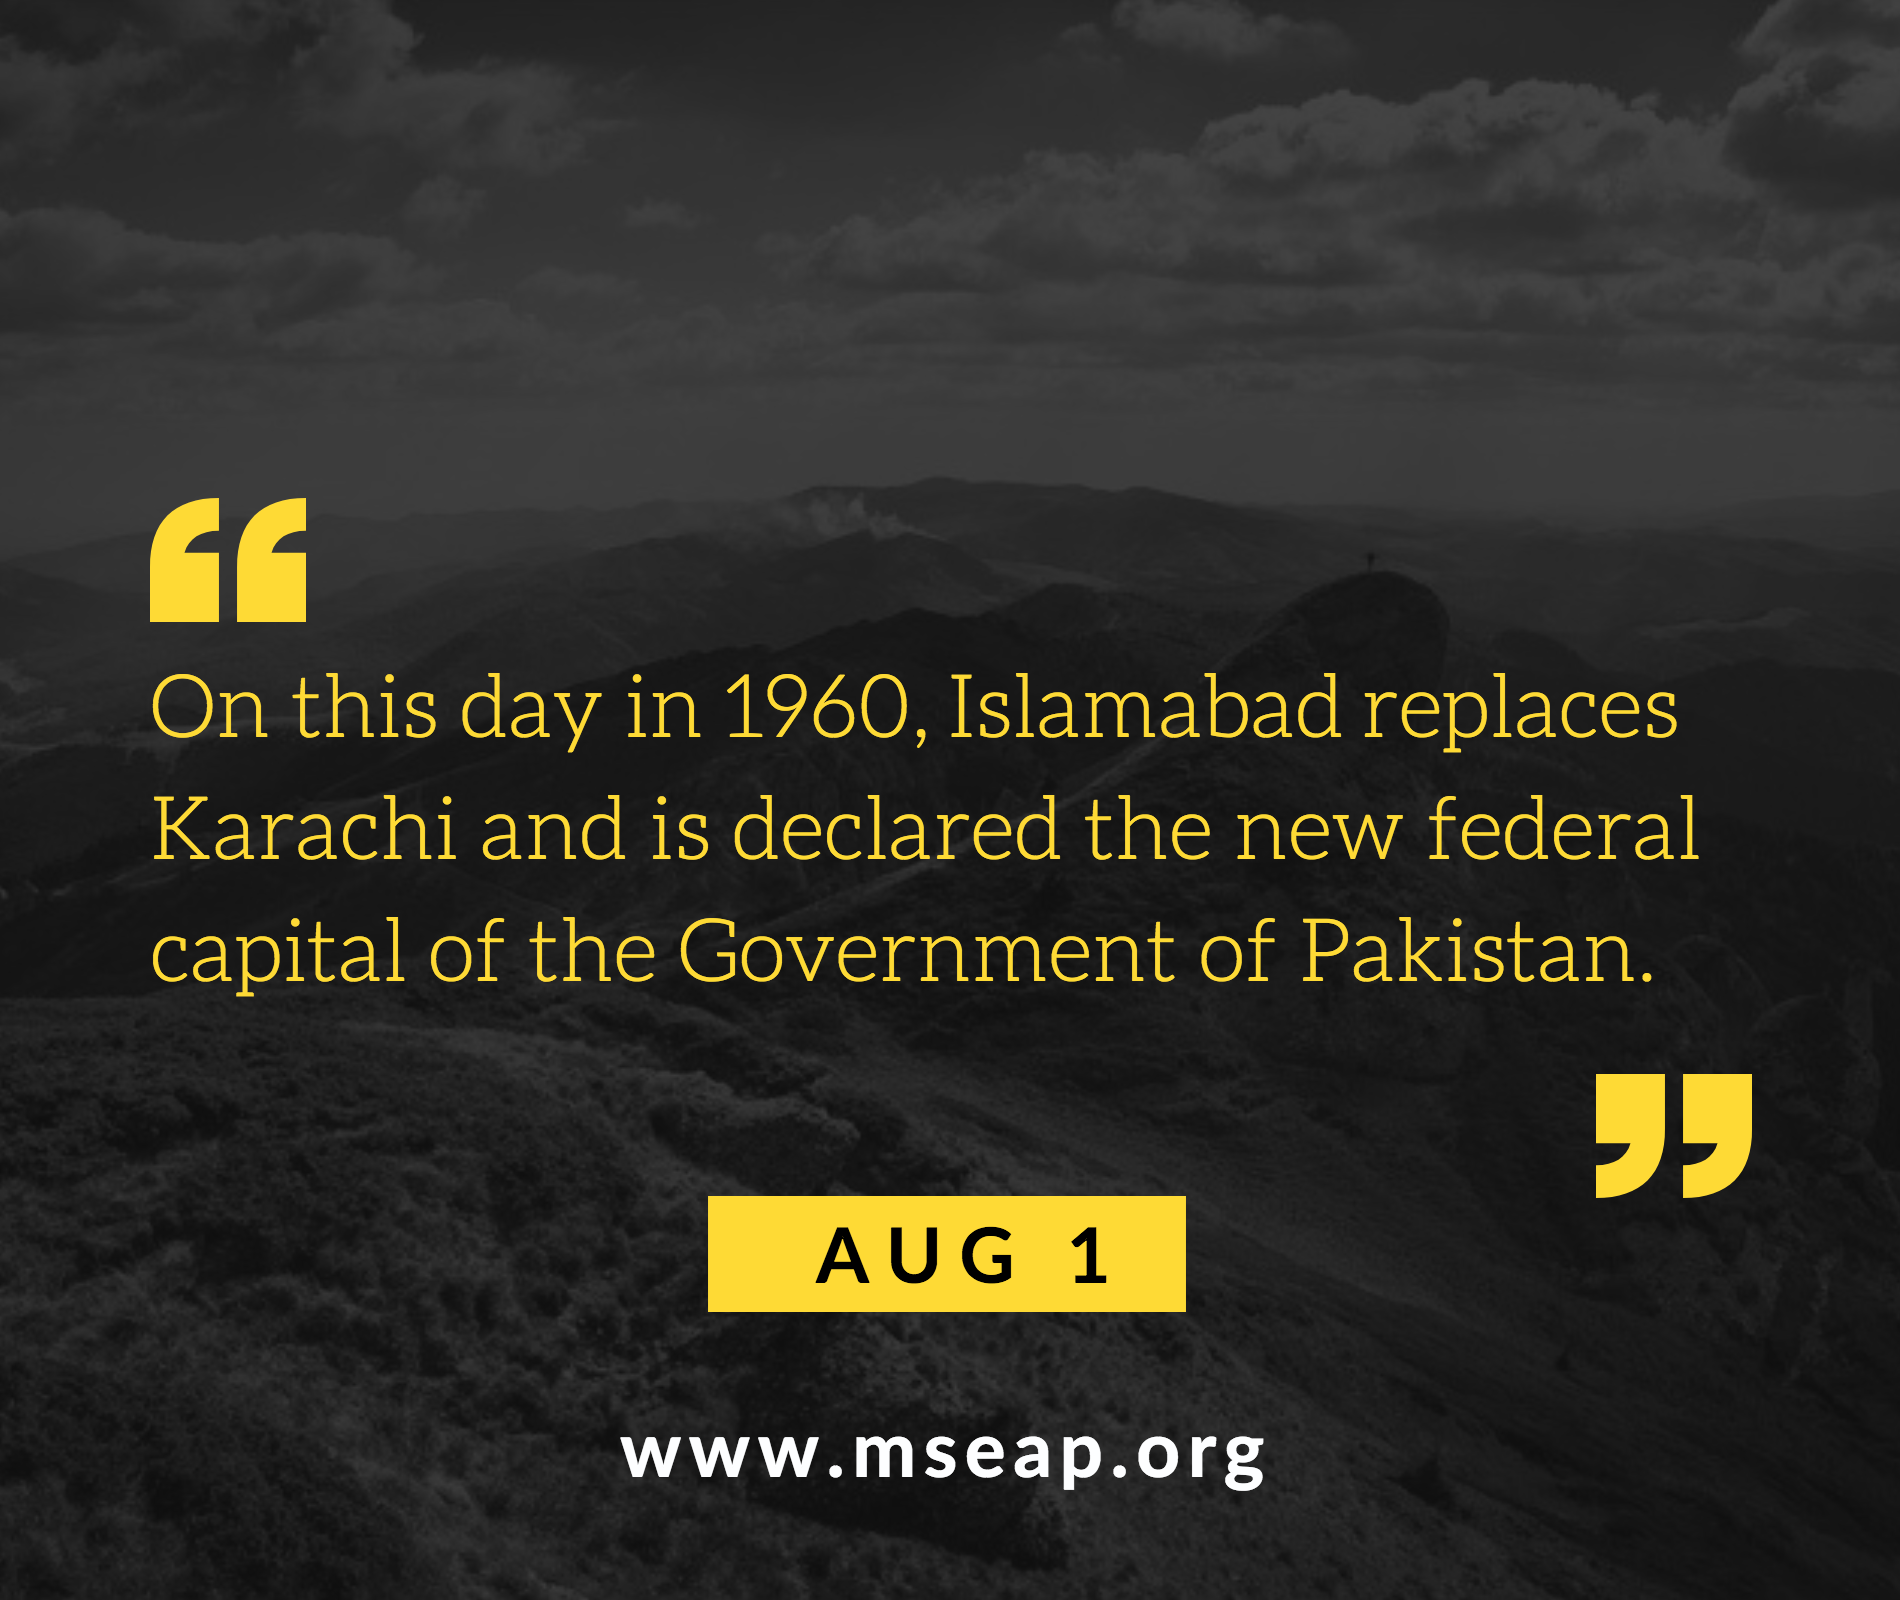 [Today in history] Aug 1